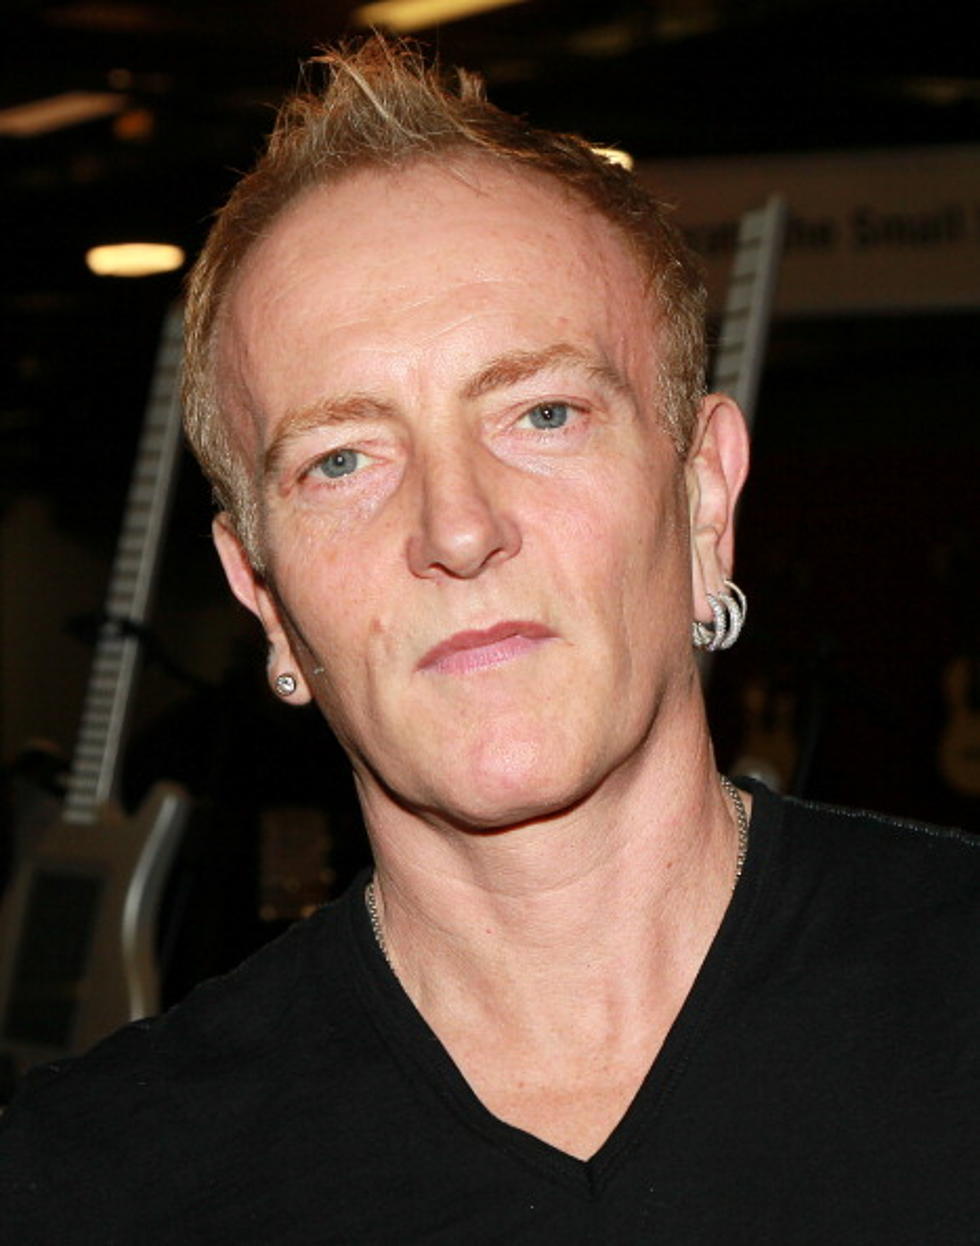 Def Leppard’s Phil Collen Joins the Fight Against Childhood Obesity